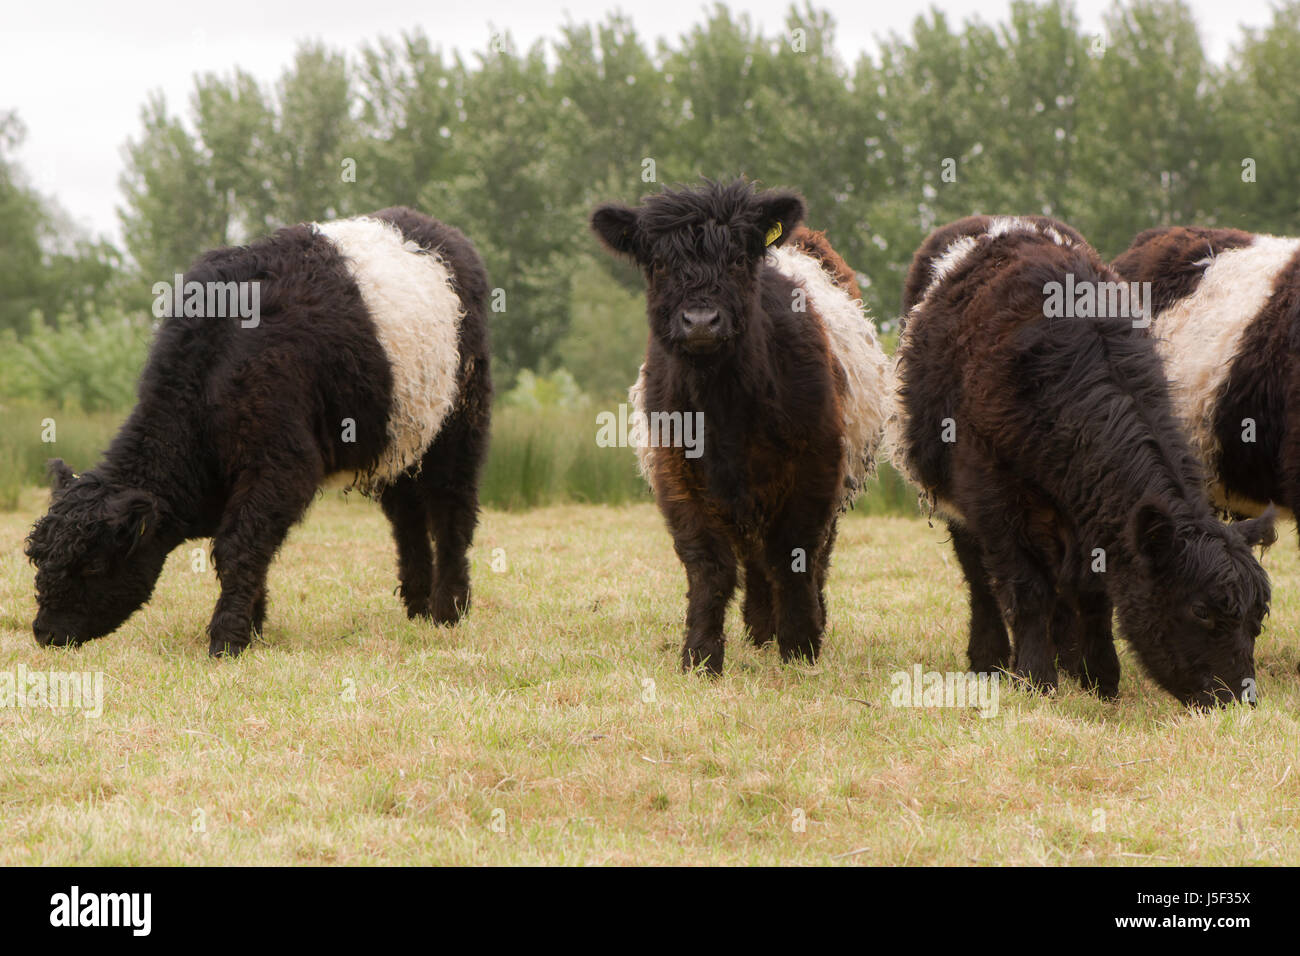 Belted galloway cattle grazing. Attractive heritage breed of beef cattle with long hair coat Stock Photo